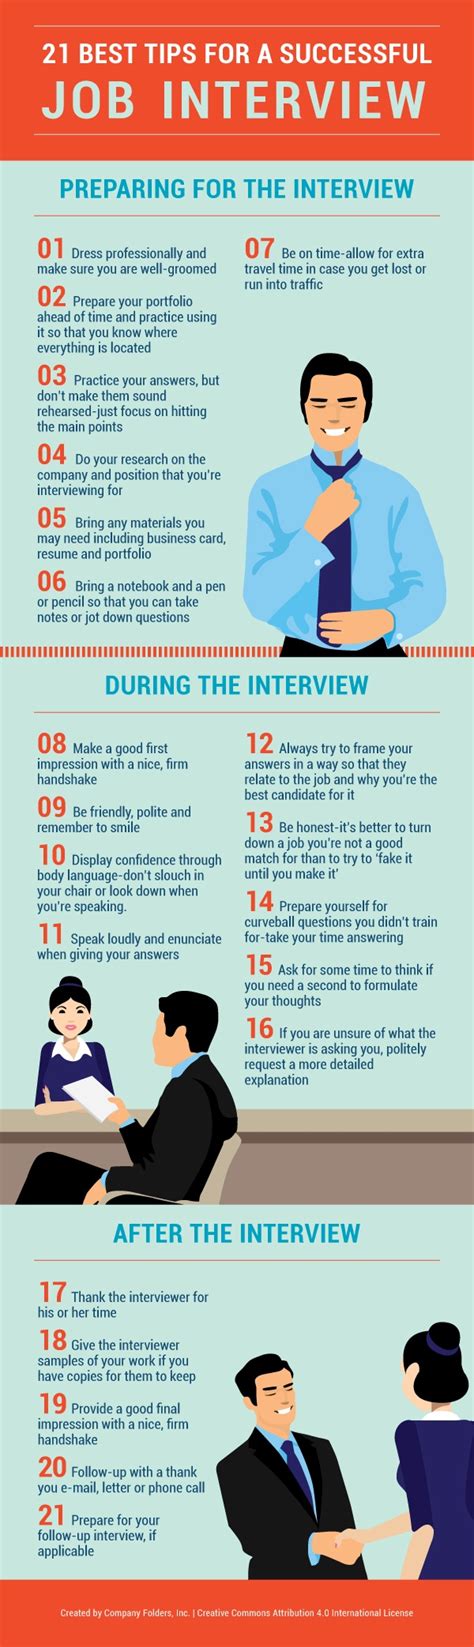 The Significance of Interview Skills in Attaining Career Advancement